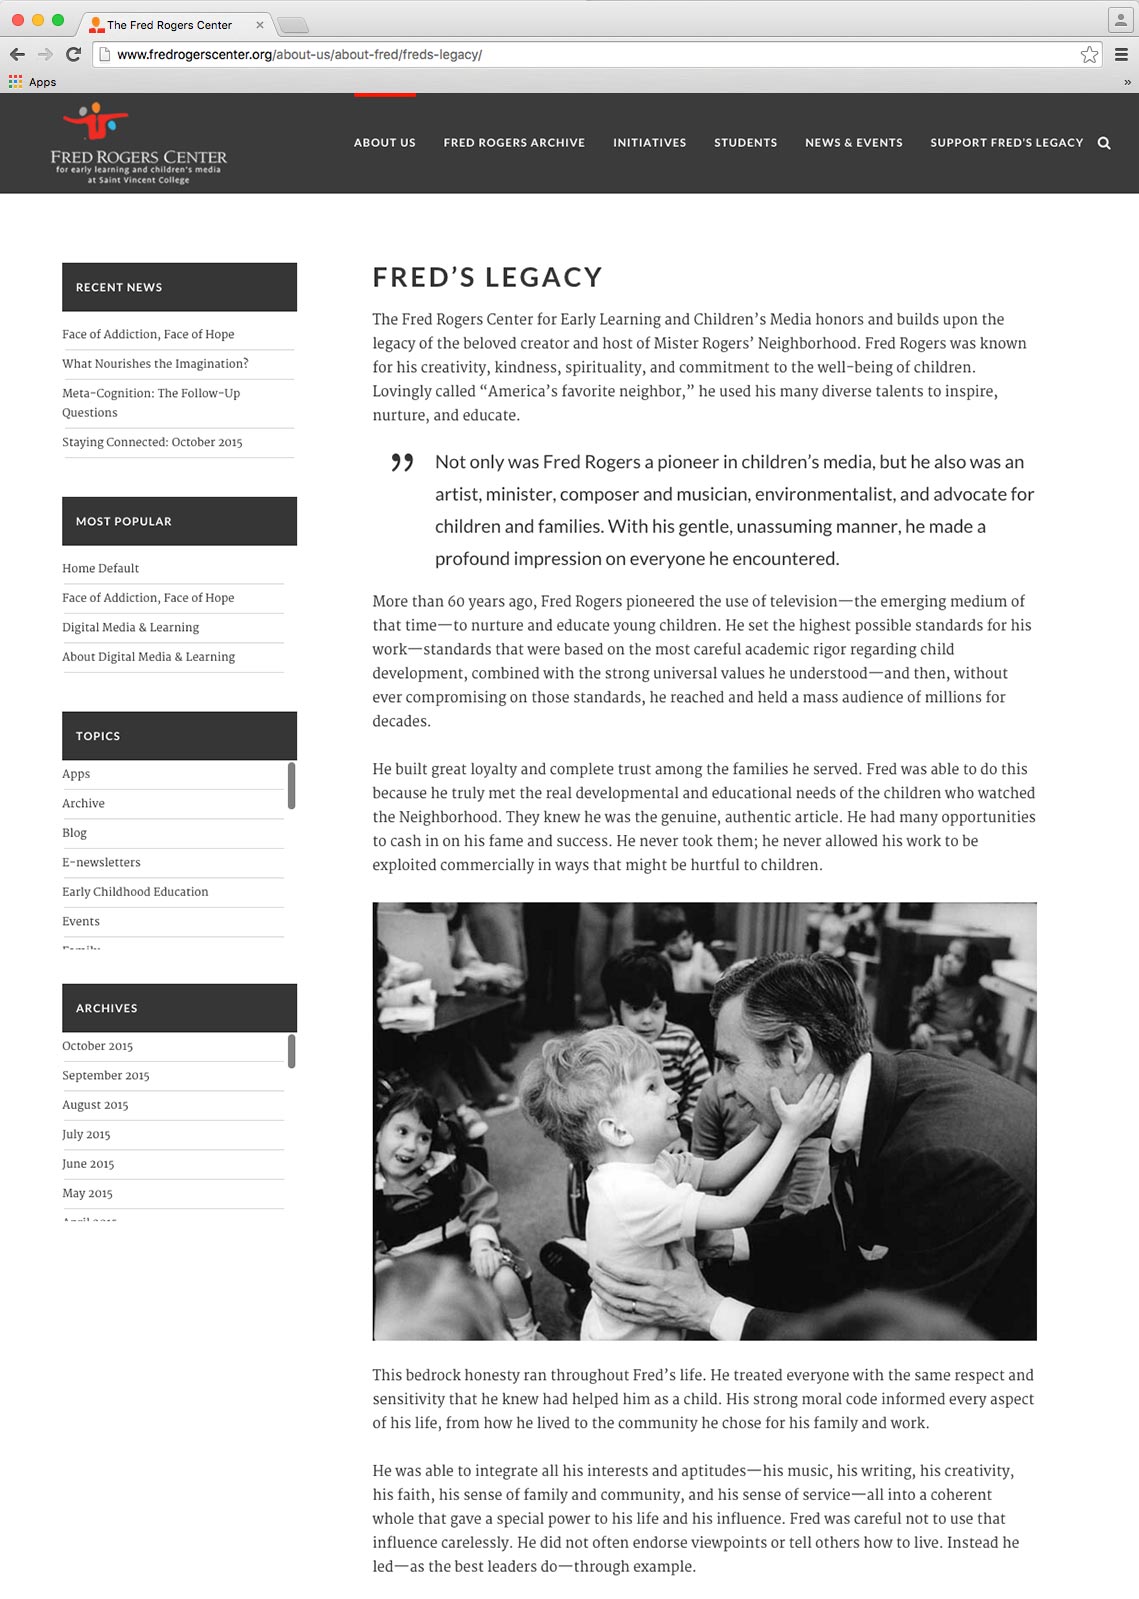 An example of a subpage of the Fred Rogers Center website with a photo of a smiling child holding Fred's face in his hands.